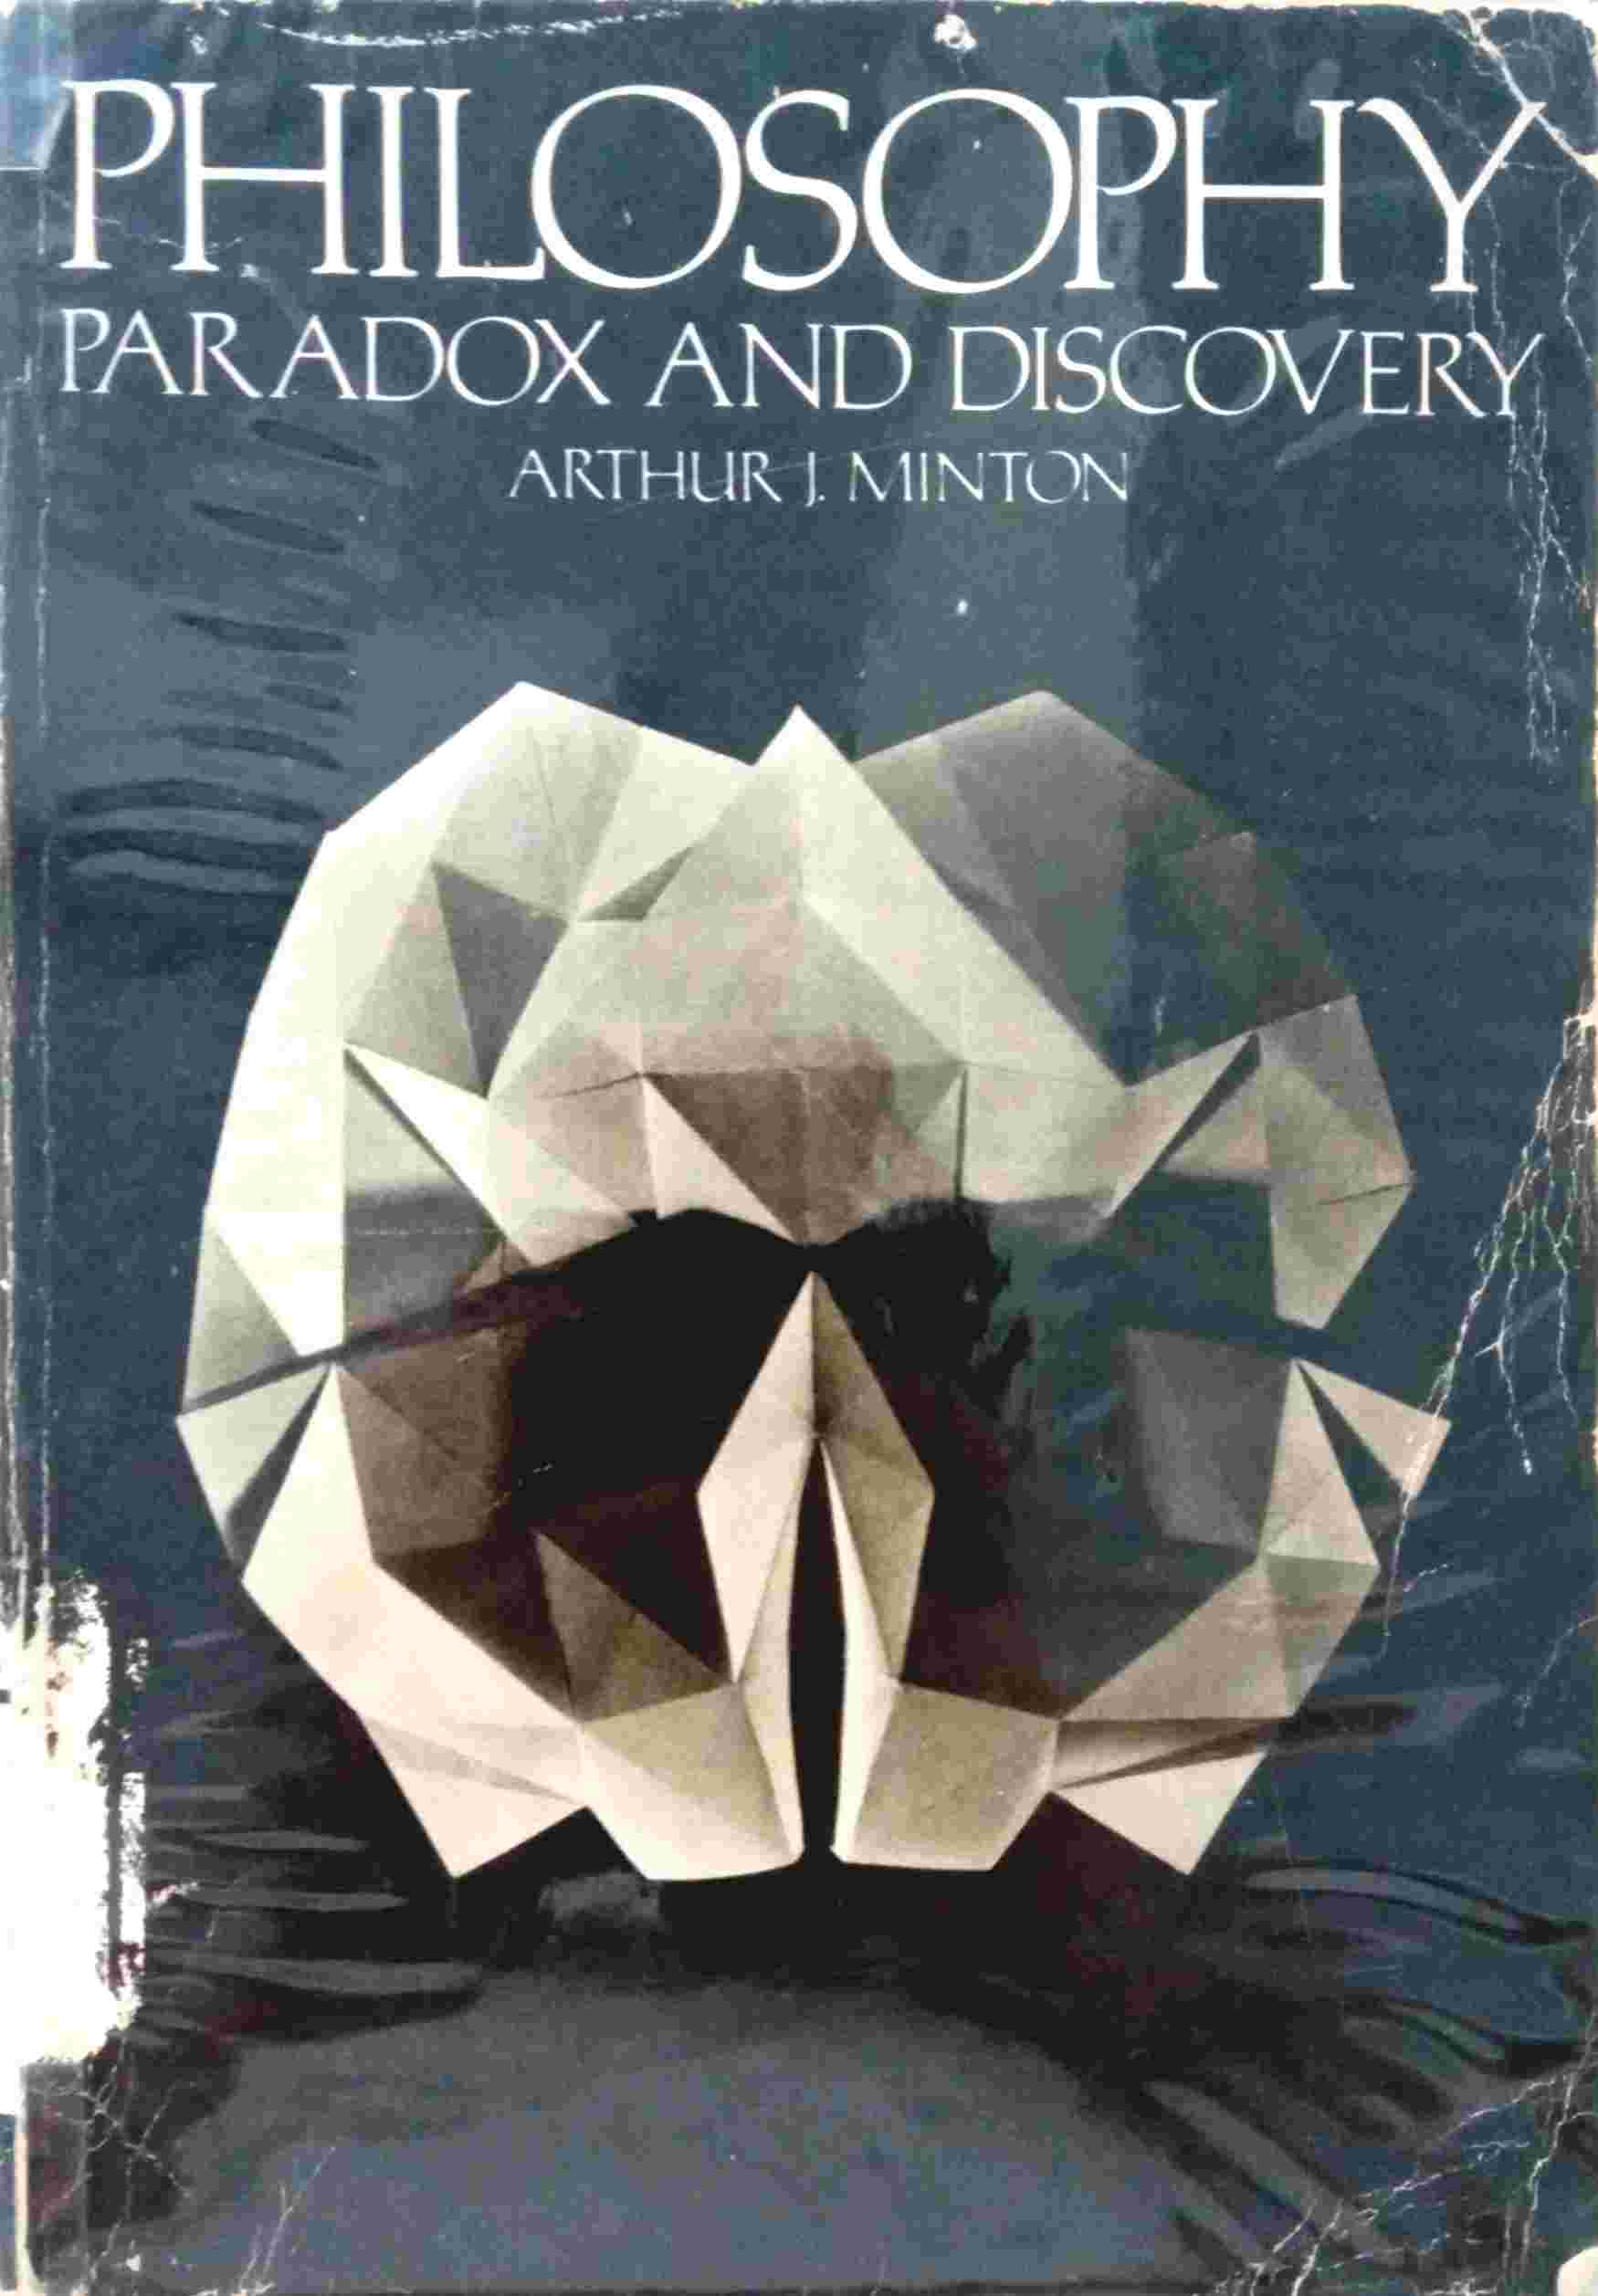 PHILOSOPHY PARADOX AND DISCOVERY